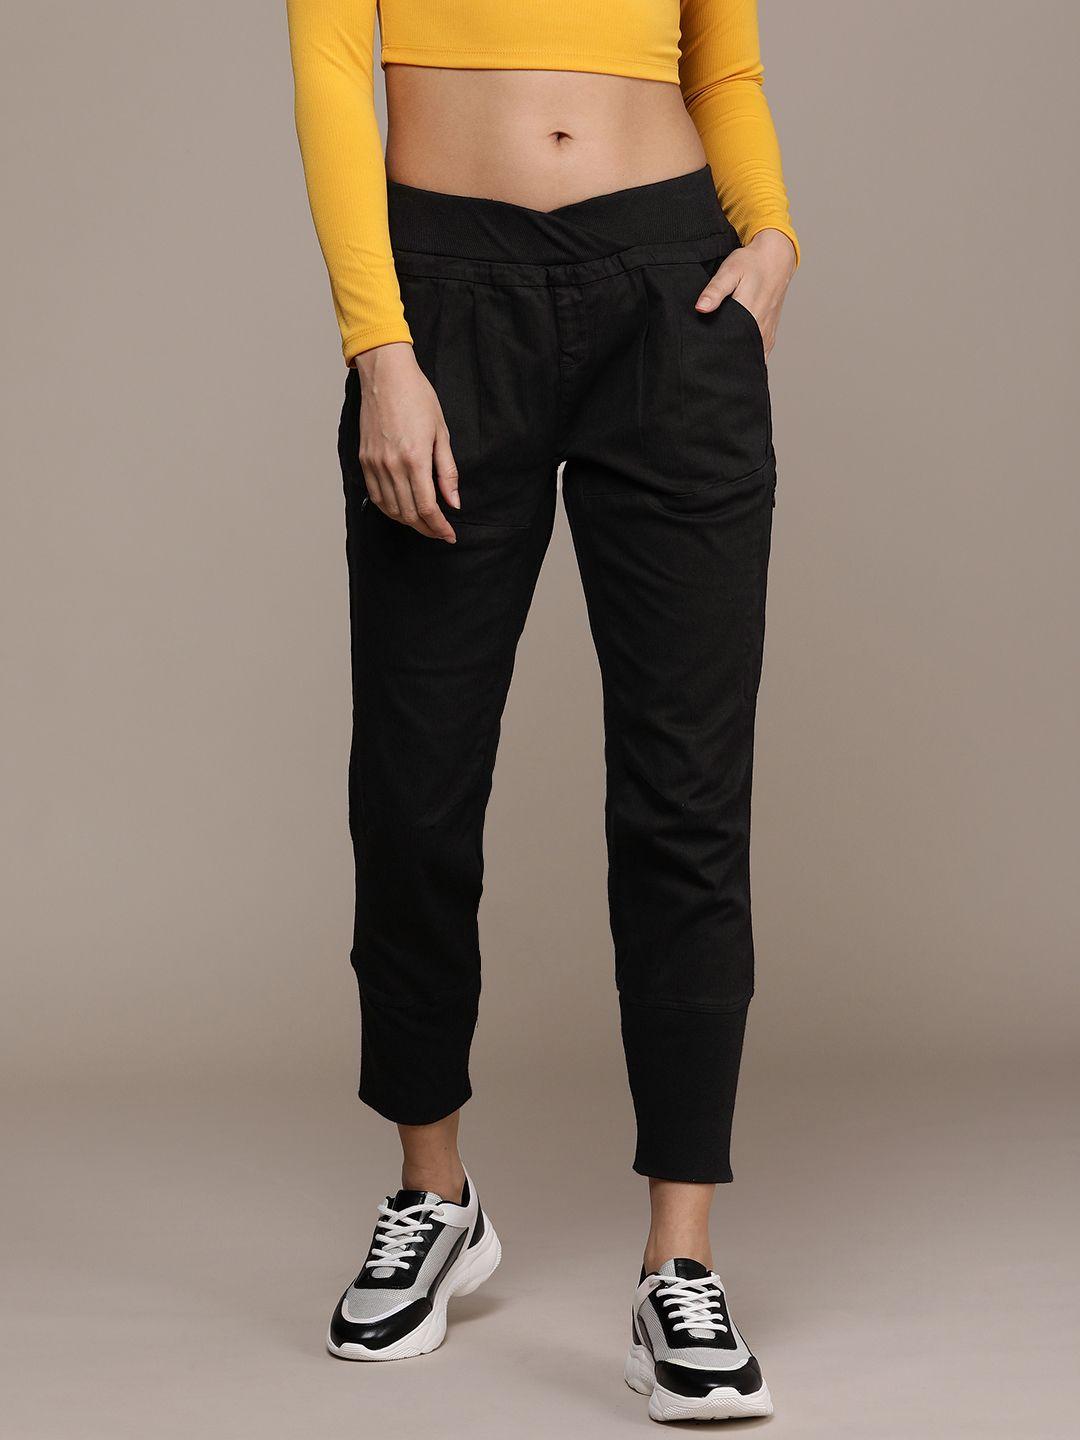 the-roadster-life-co.-women-solid-cropped-joggers-trousers